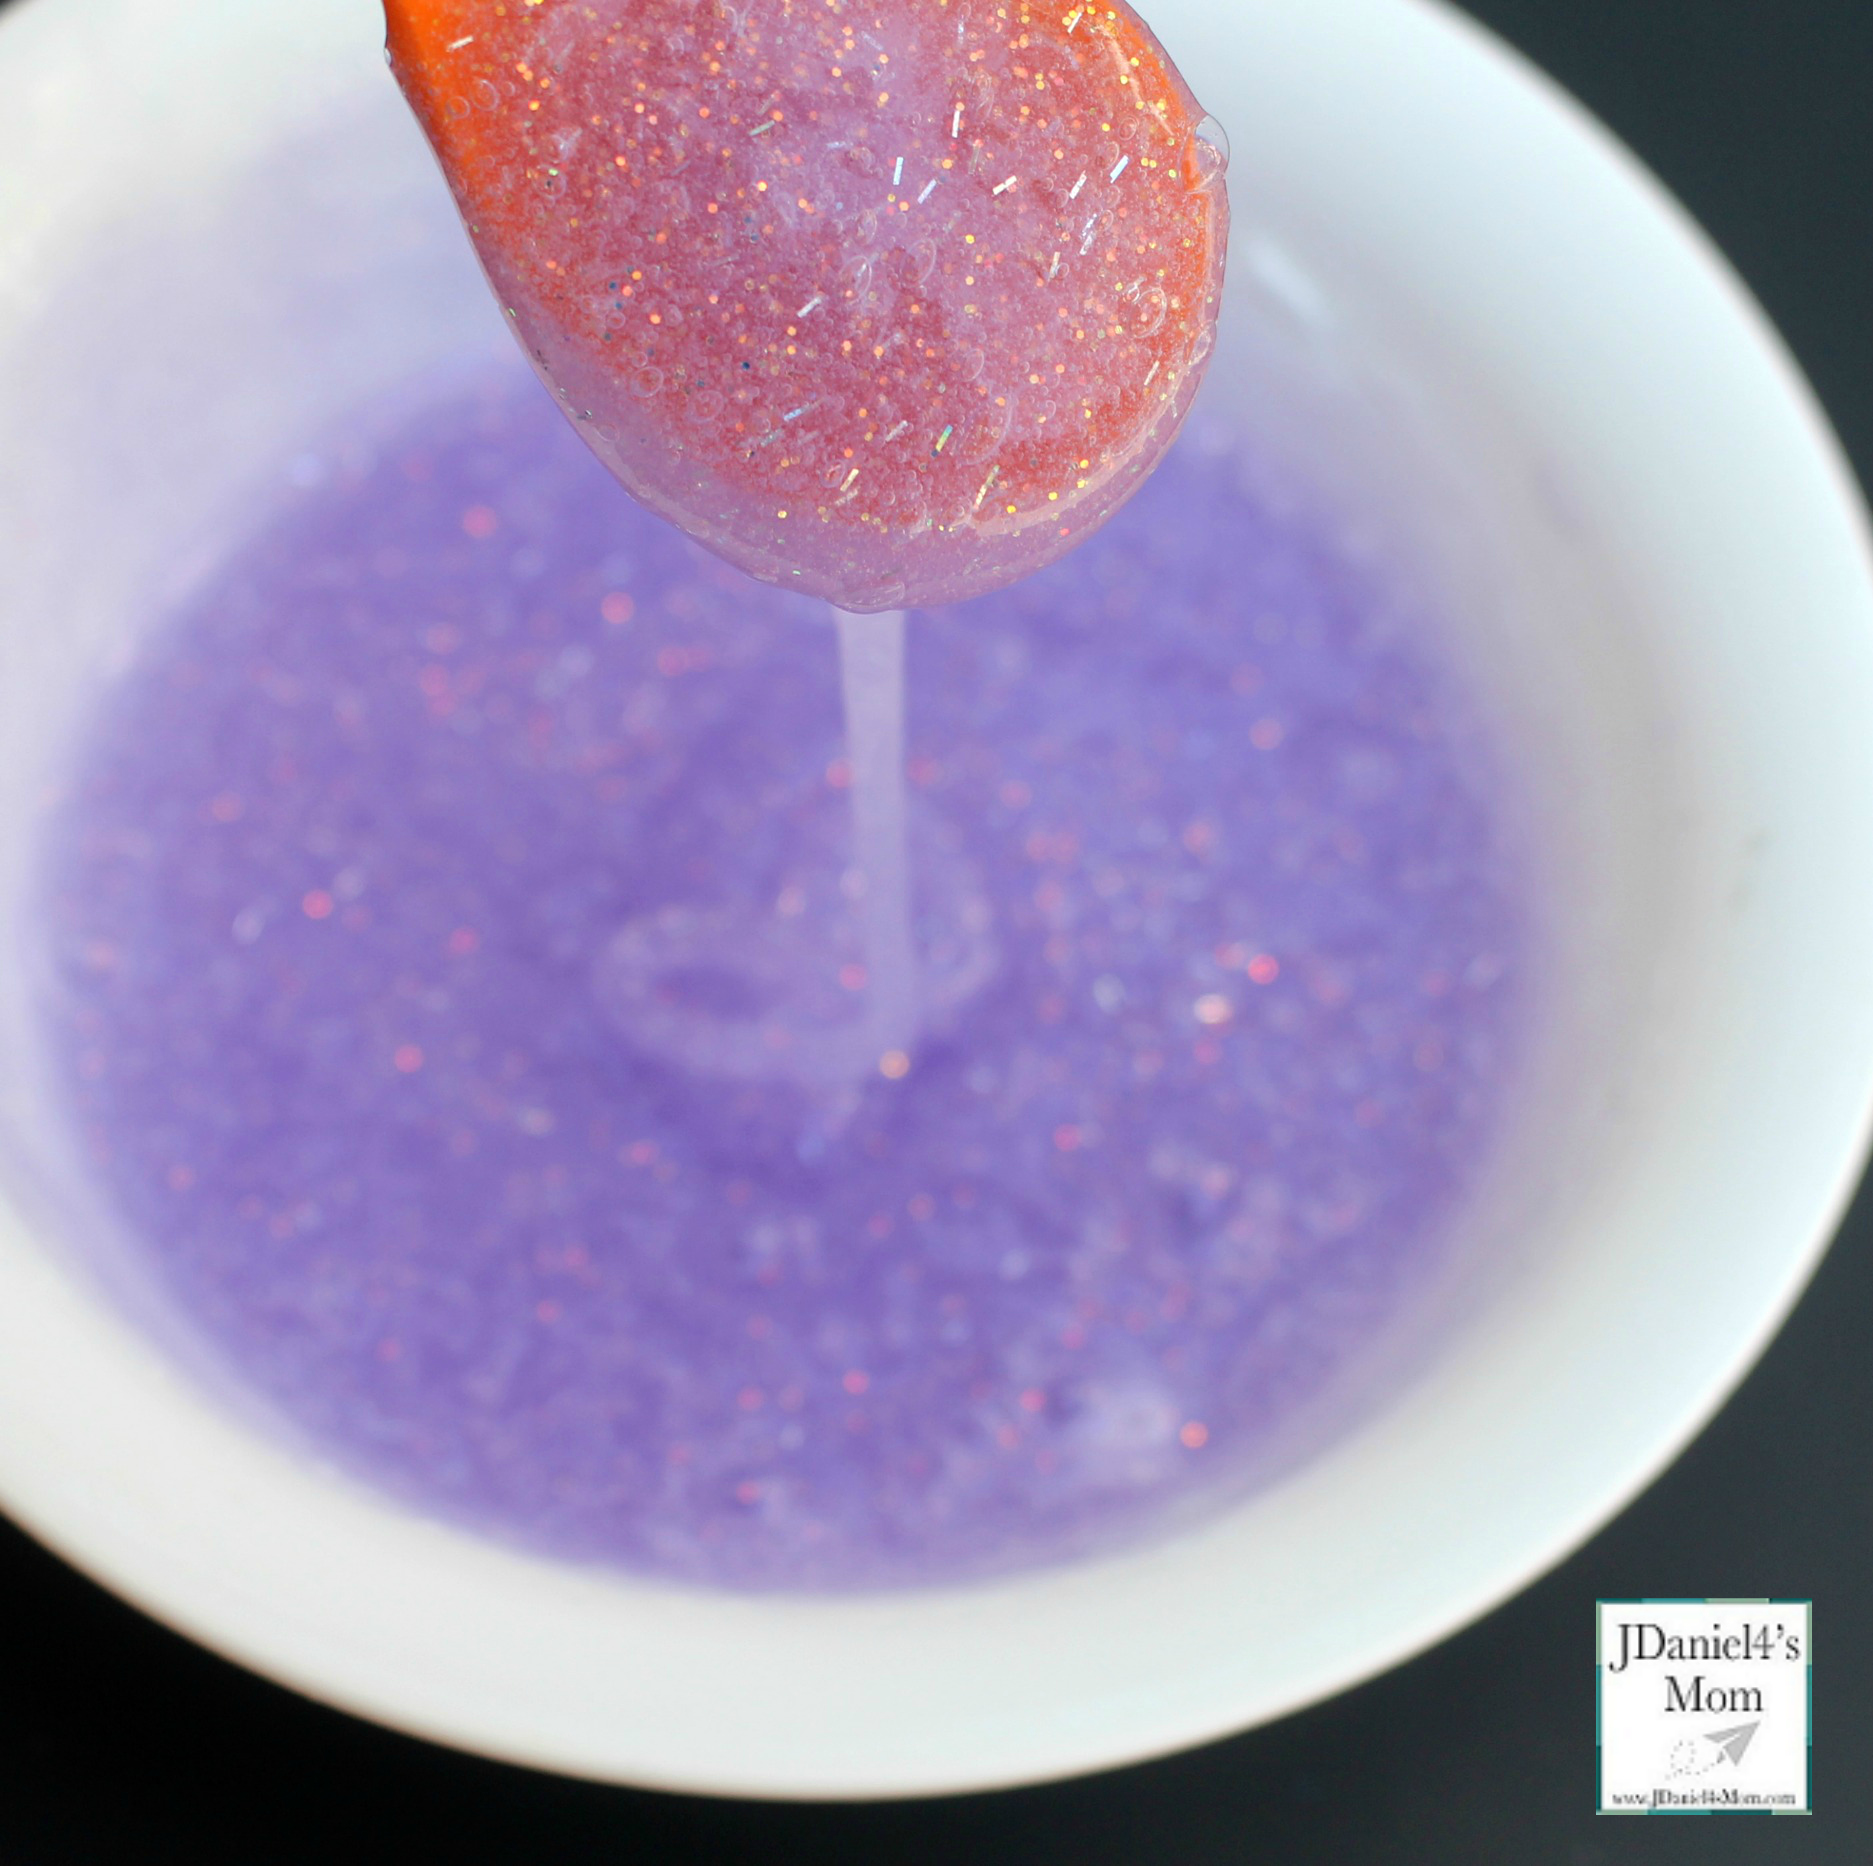 How to Make Slime with Saline Solution Coding Activity - Dripping Slime